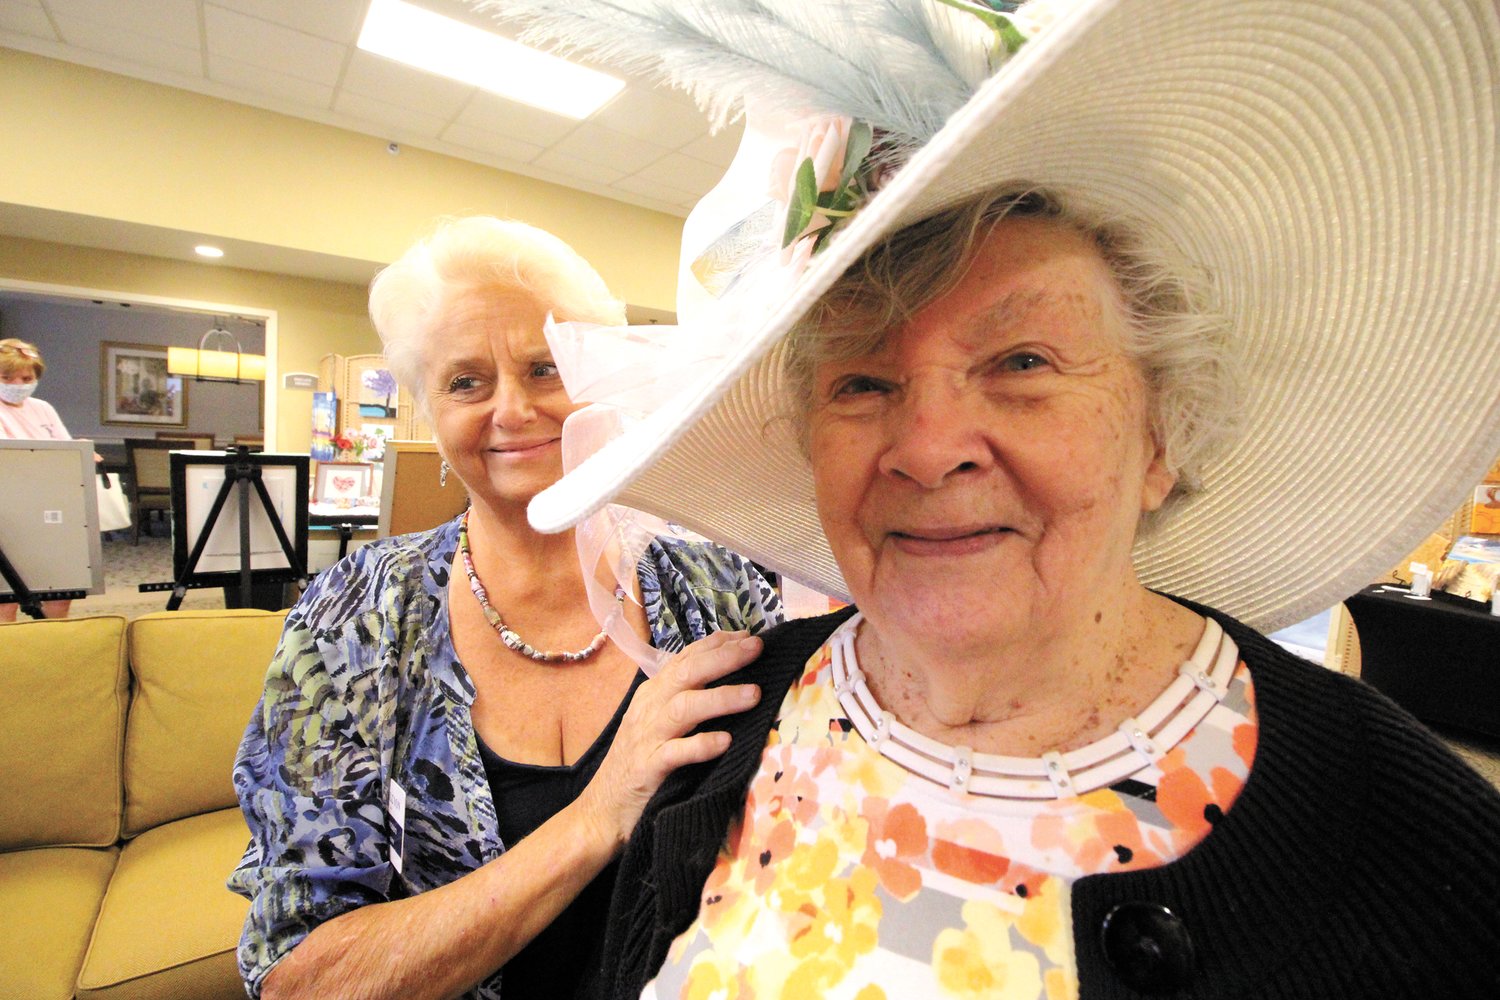 CAT IN THE HAT: Marilyn Kasparian showed off one of the hats she decorated. Will she wear it for the Running of the Roses, or is it just to bring a smile to the tenants at Halcyon Senior Living? Either way, it’s fun.